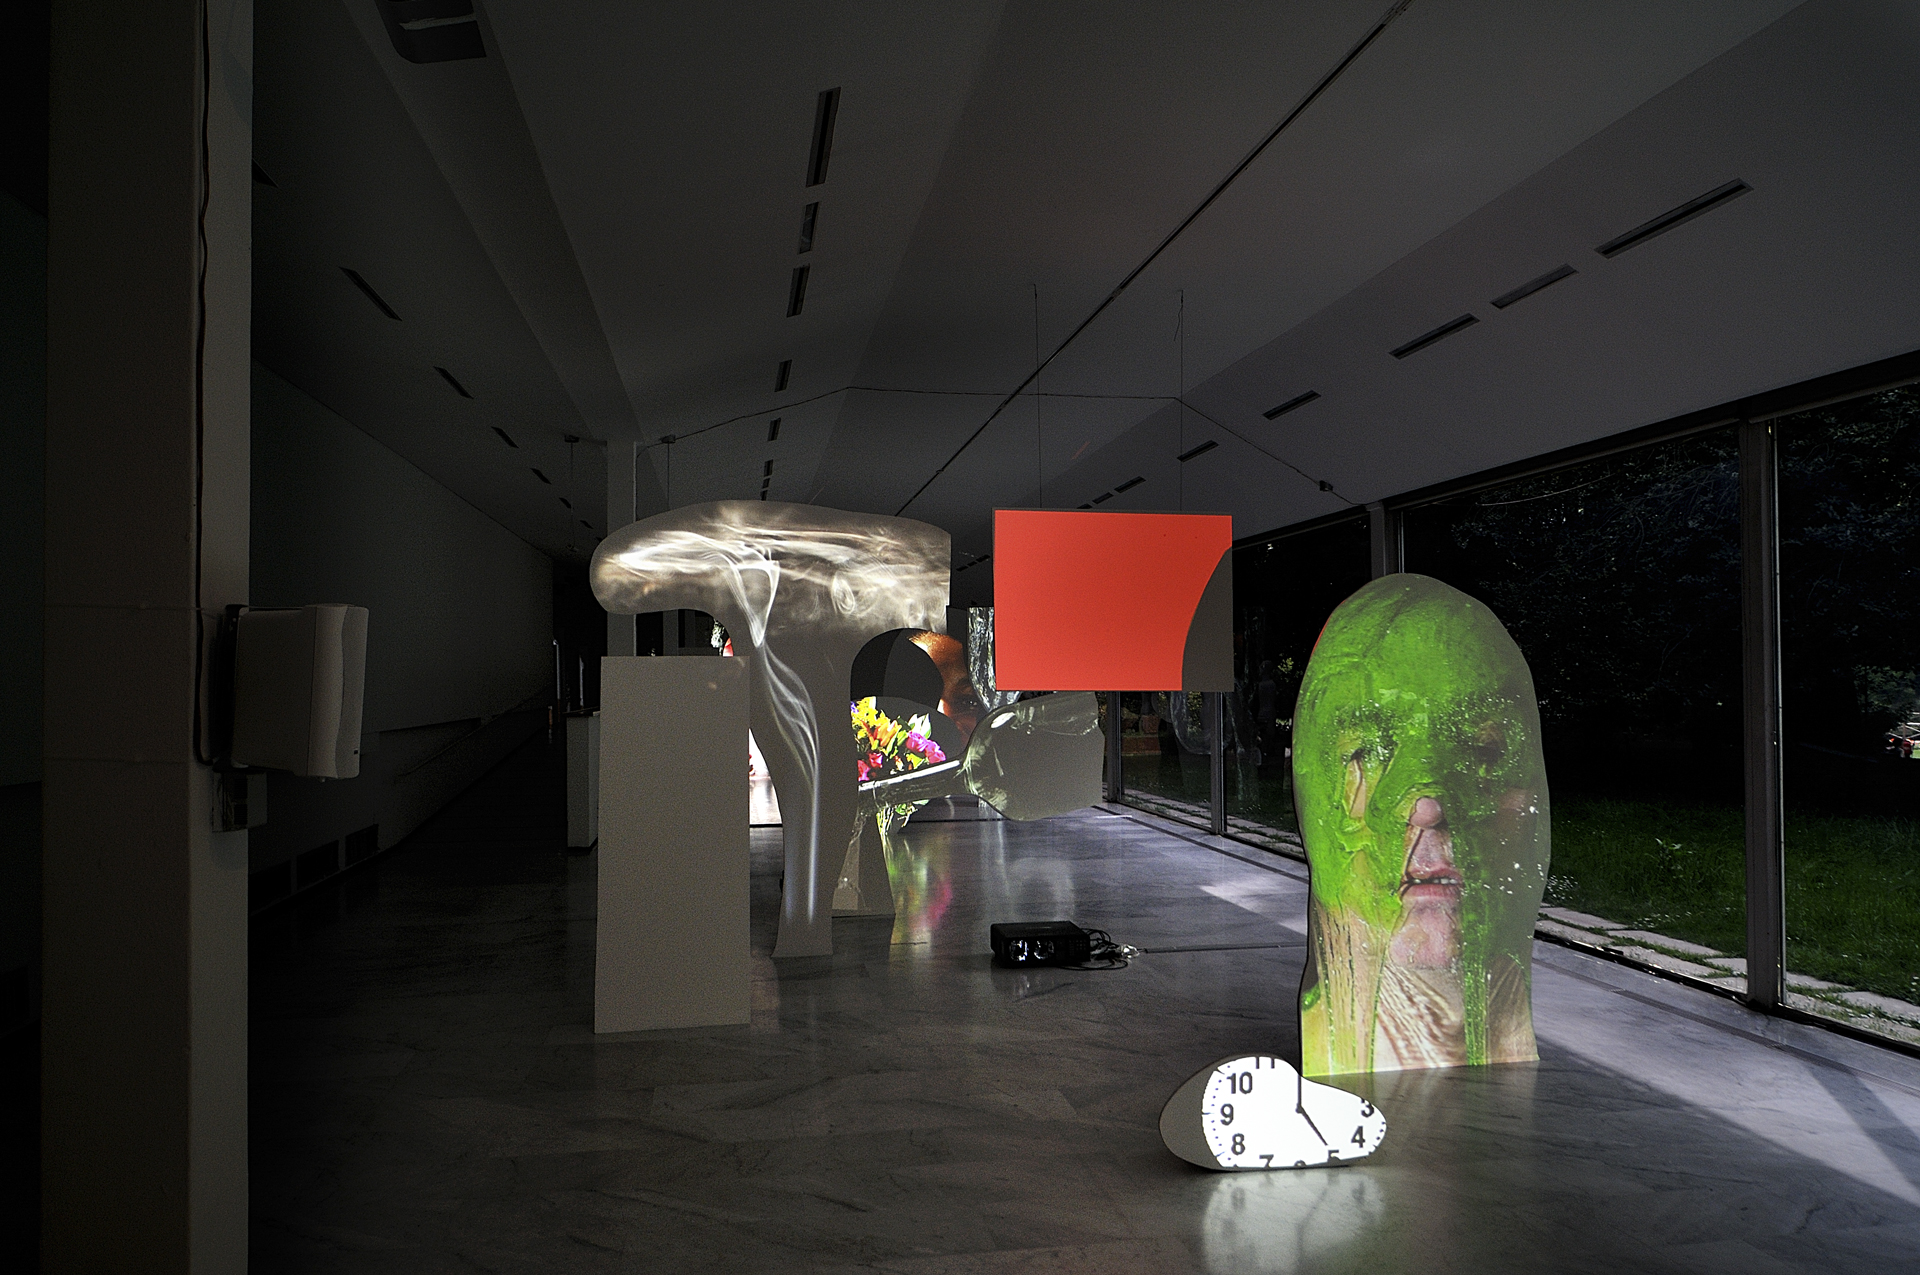 TONY OURSLER / OPEN OBSCURA  / PAC / Milano 2011